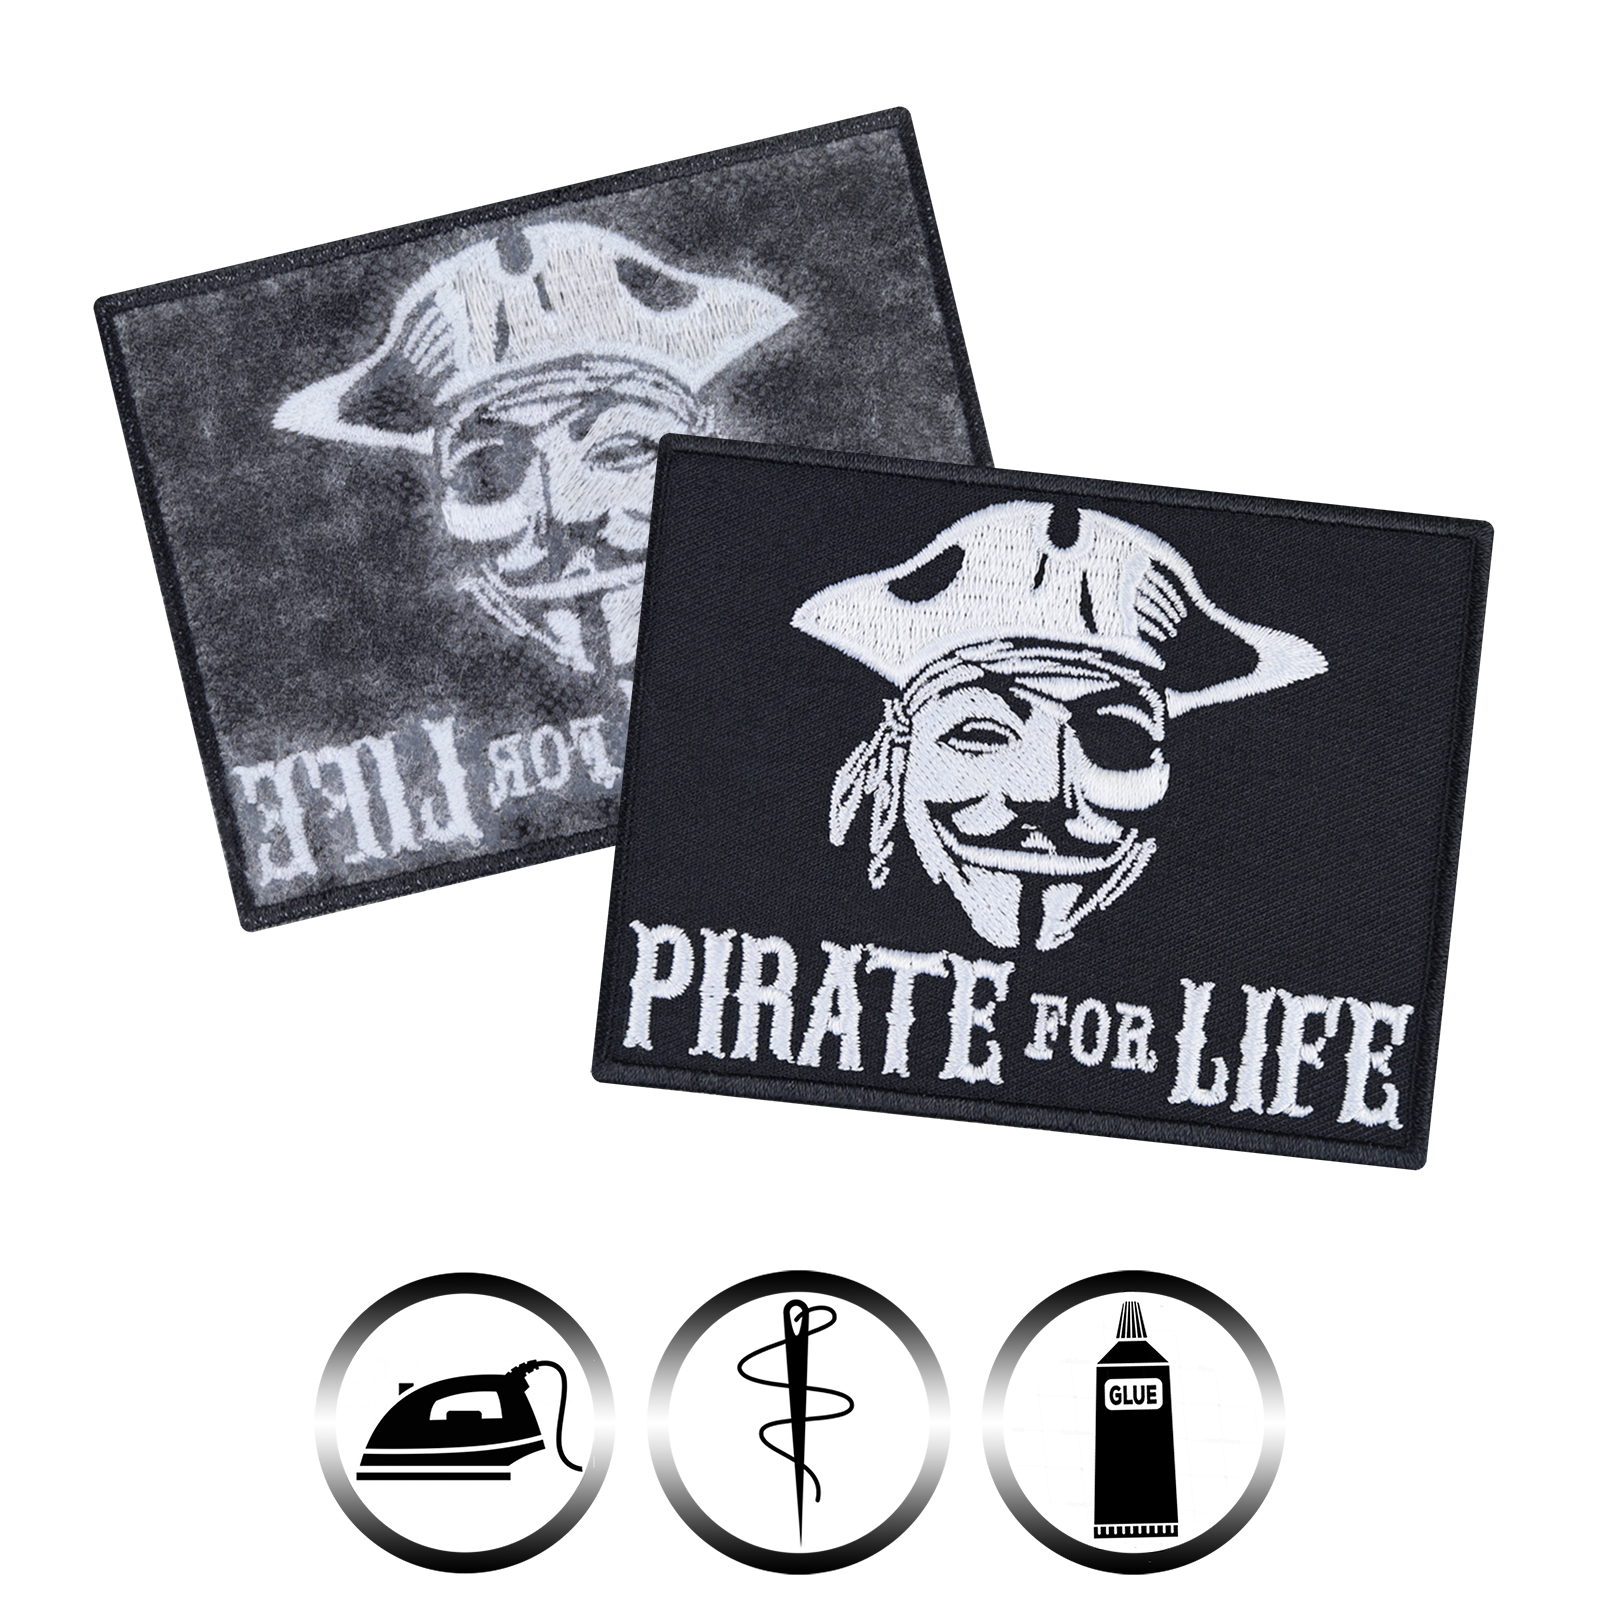 Pirate for life - Patch